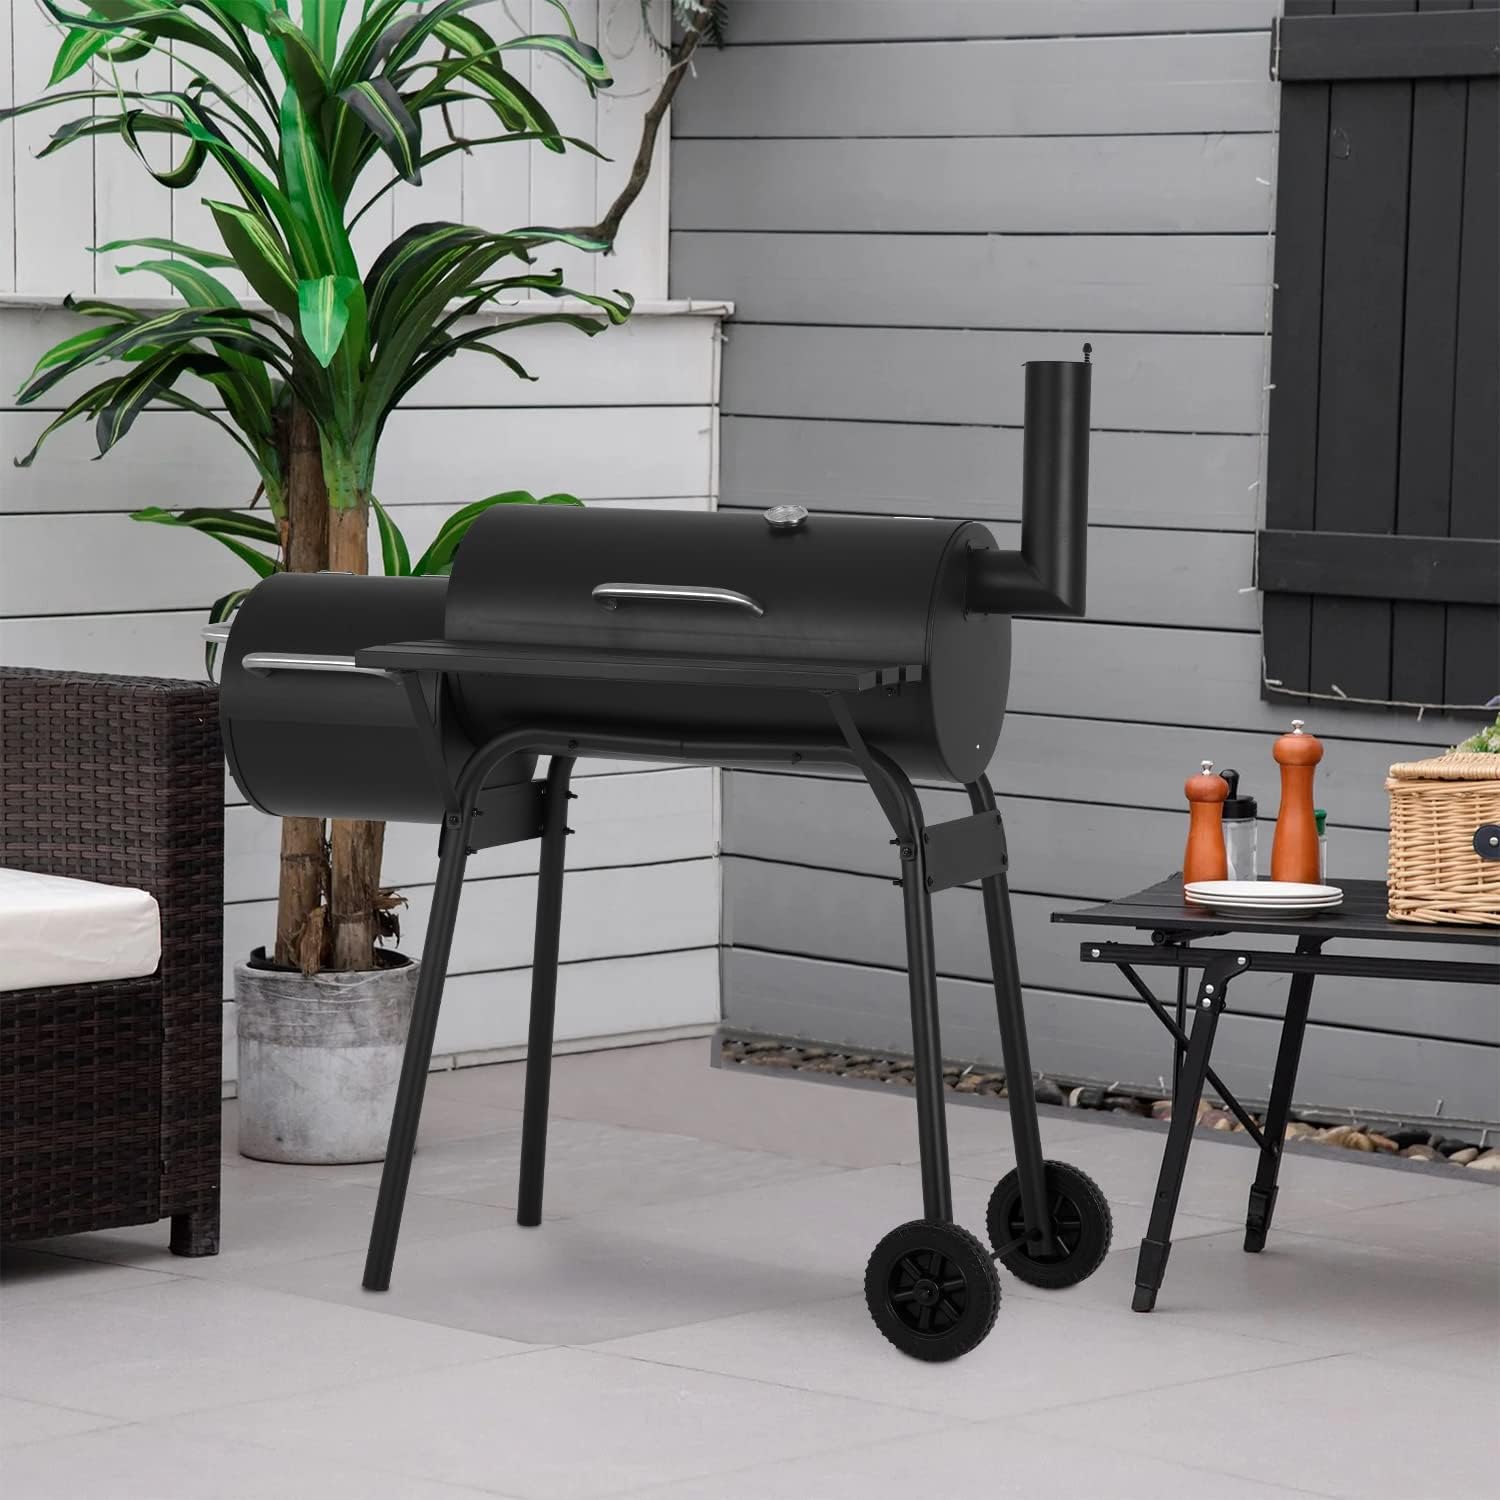 43-inch Charcoal Outdoor BBQ Grill - Portable Camping Grill for 6-10 People, Offset Smoker, Braised Roast, Patio and Backyard Picnic Grill